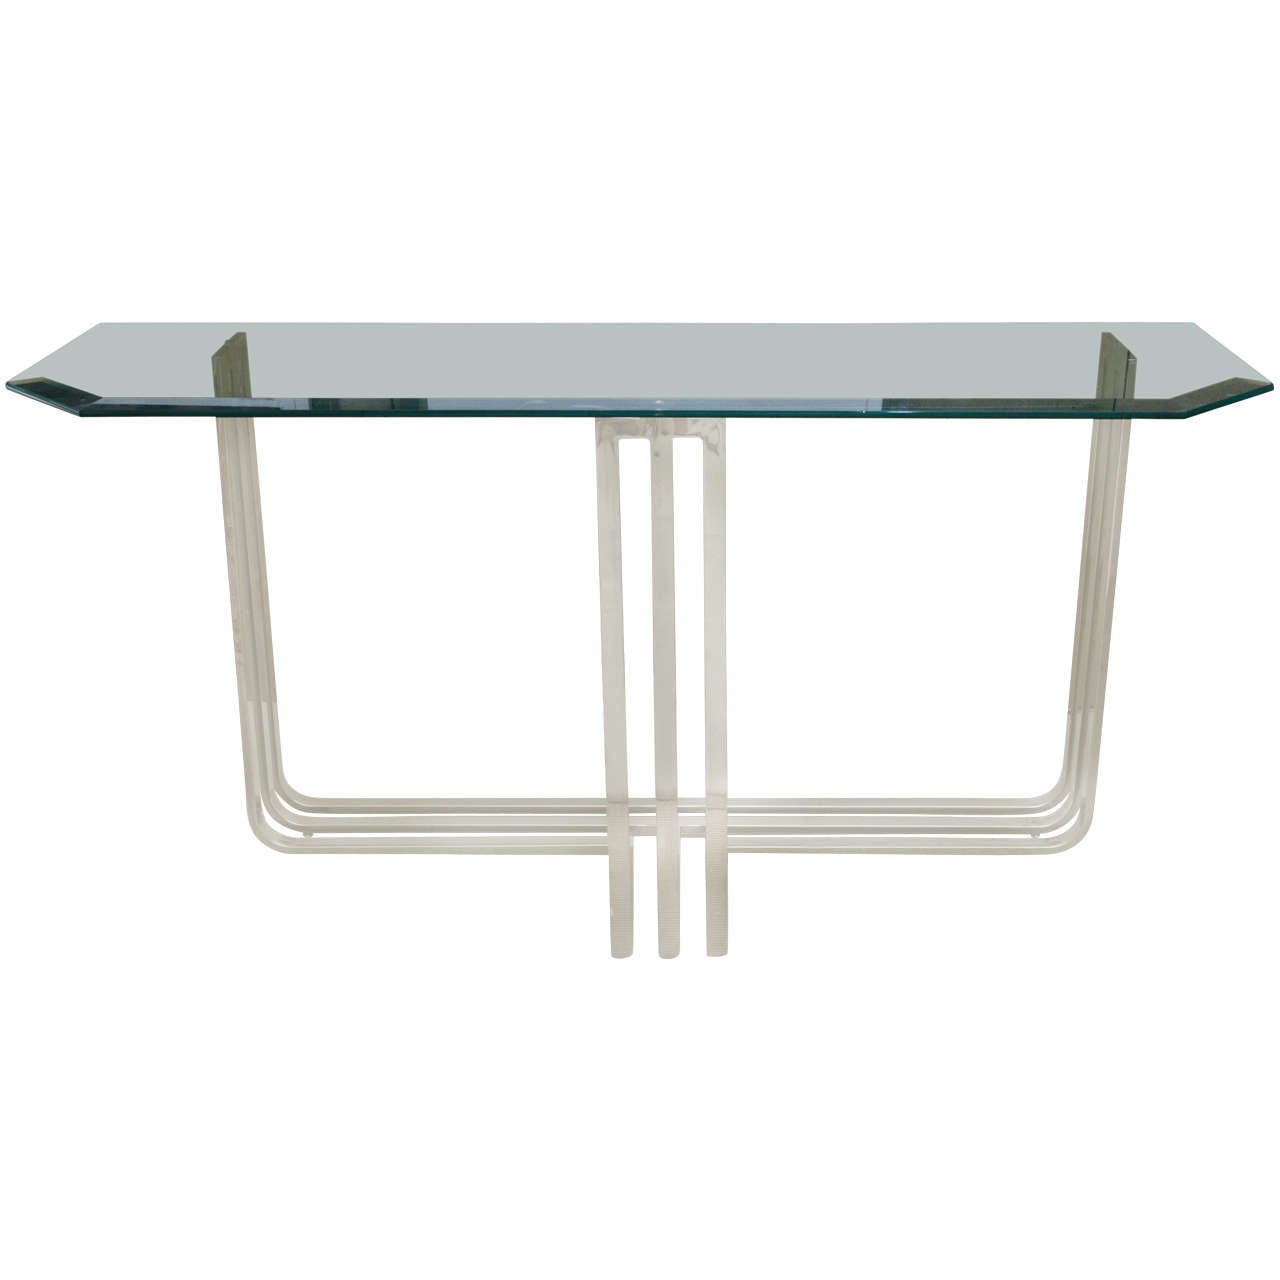 Attractive chrome and glass console attributed to DIA. The glass top has a 1.5 in. bevel.